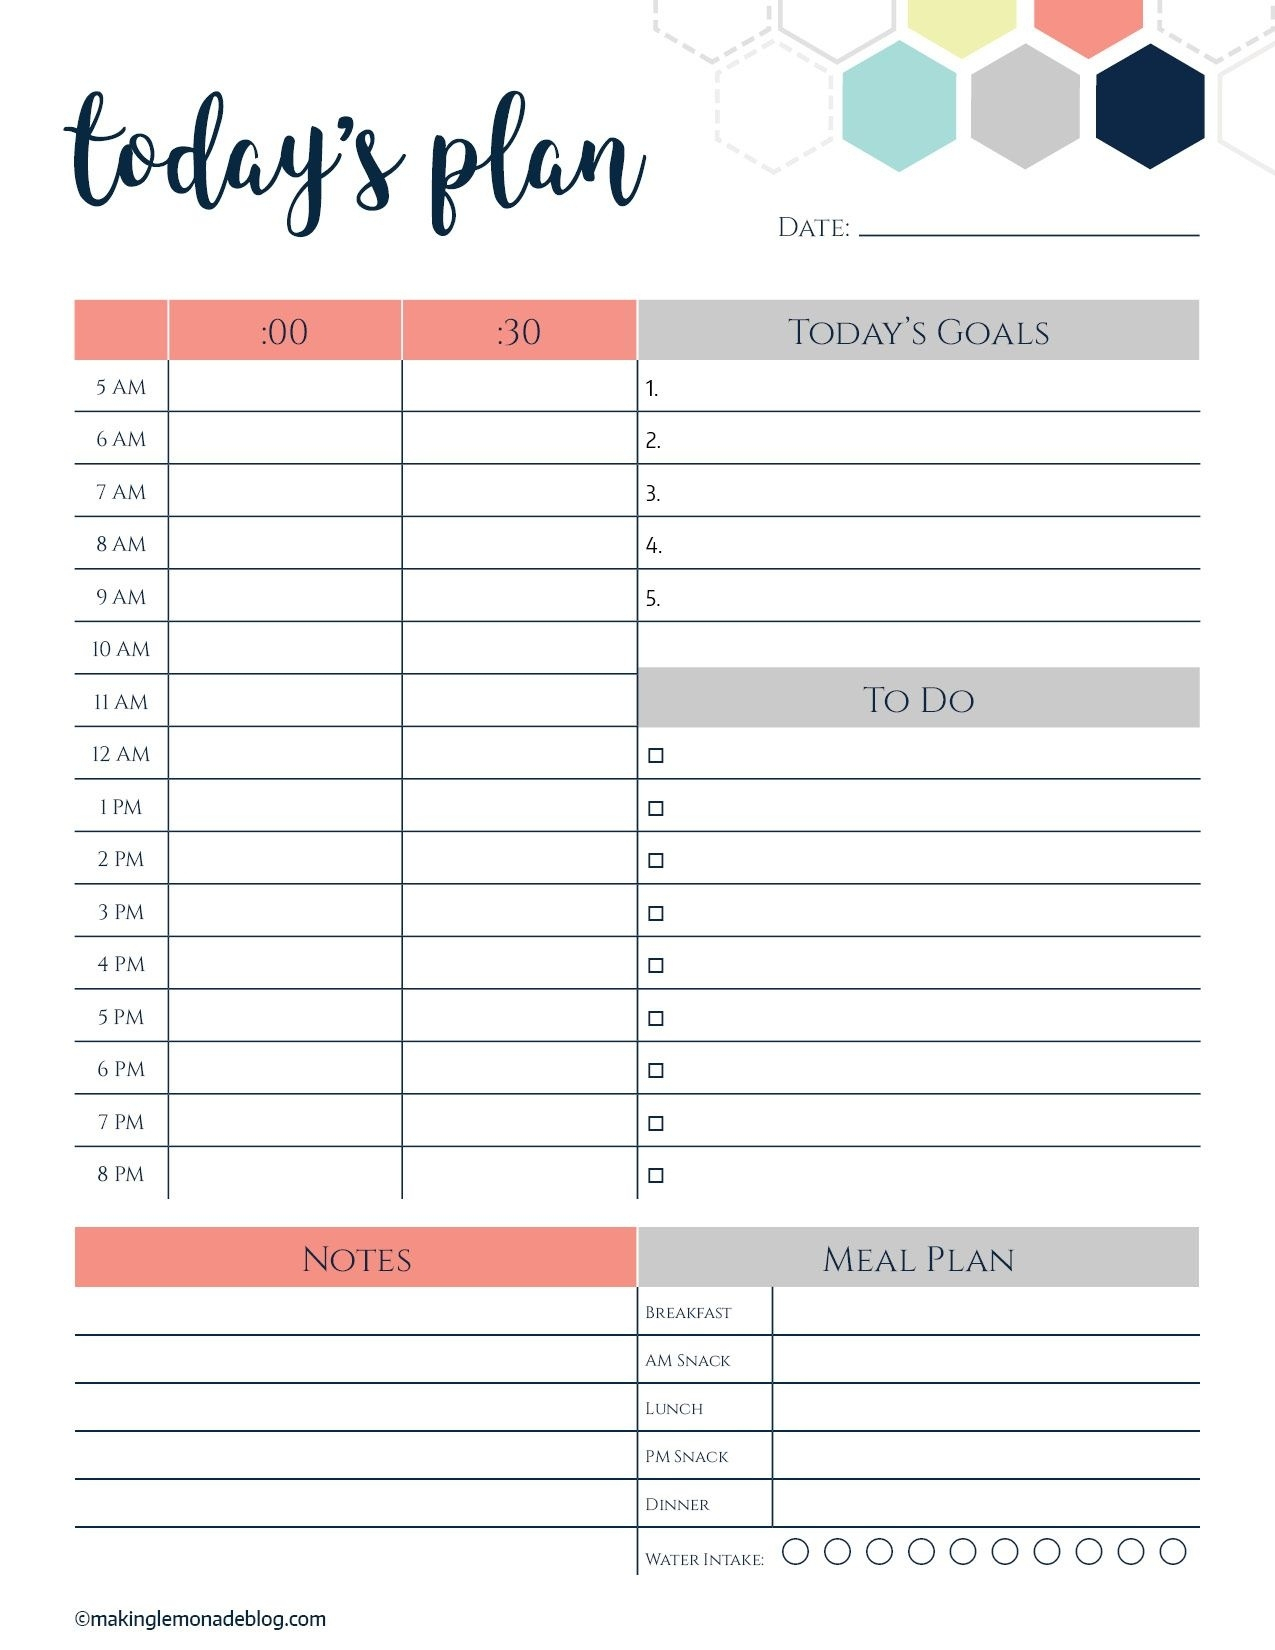 Printable Daily Calendar With Time Slots 2018  Template regarding Daily Calendar With Time Slots